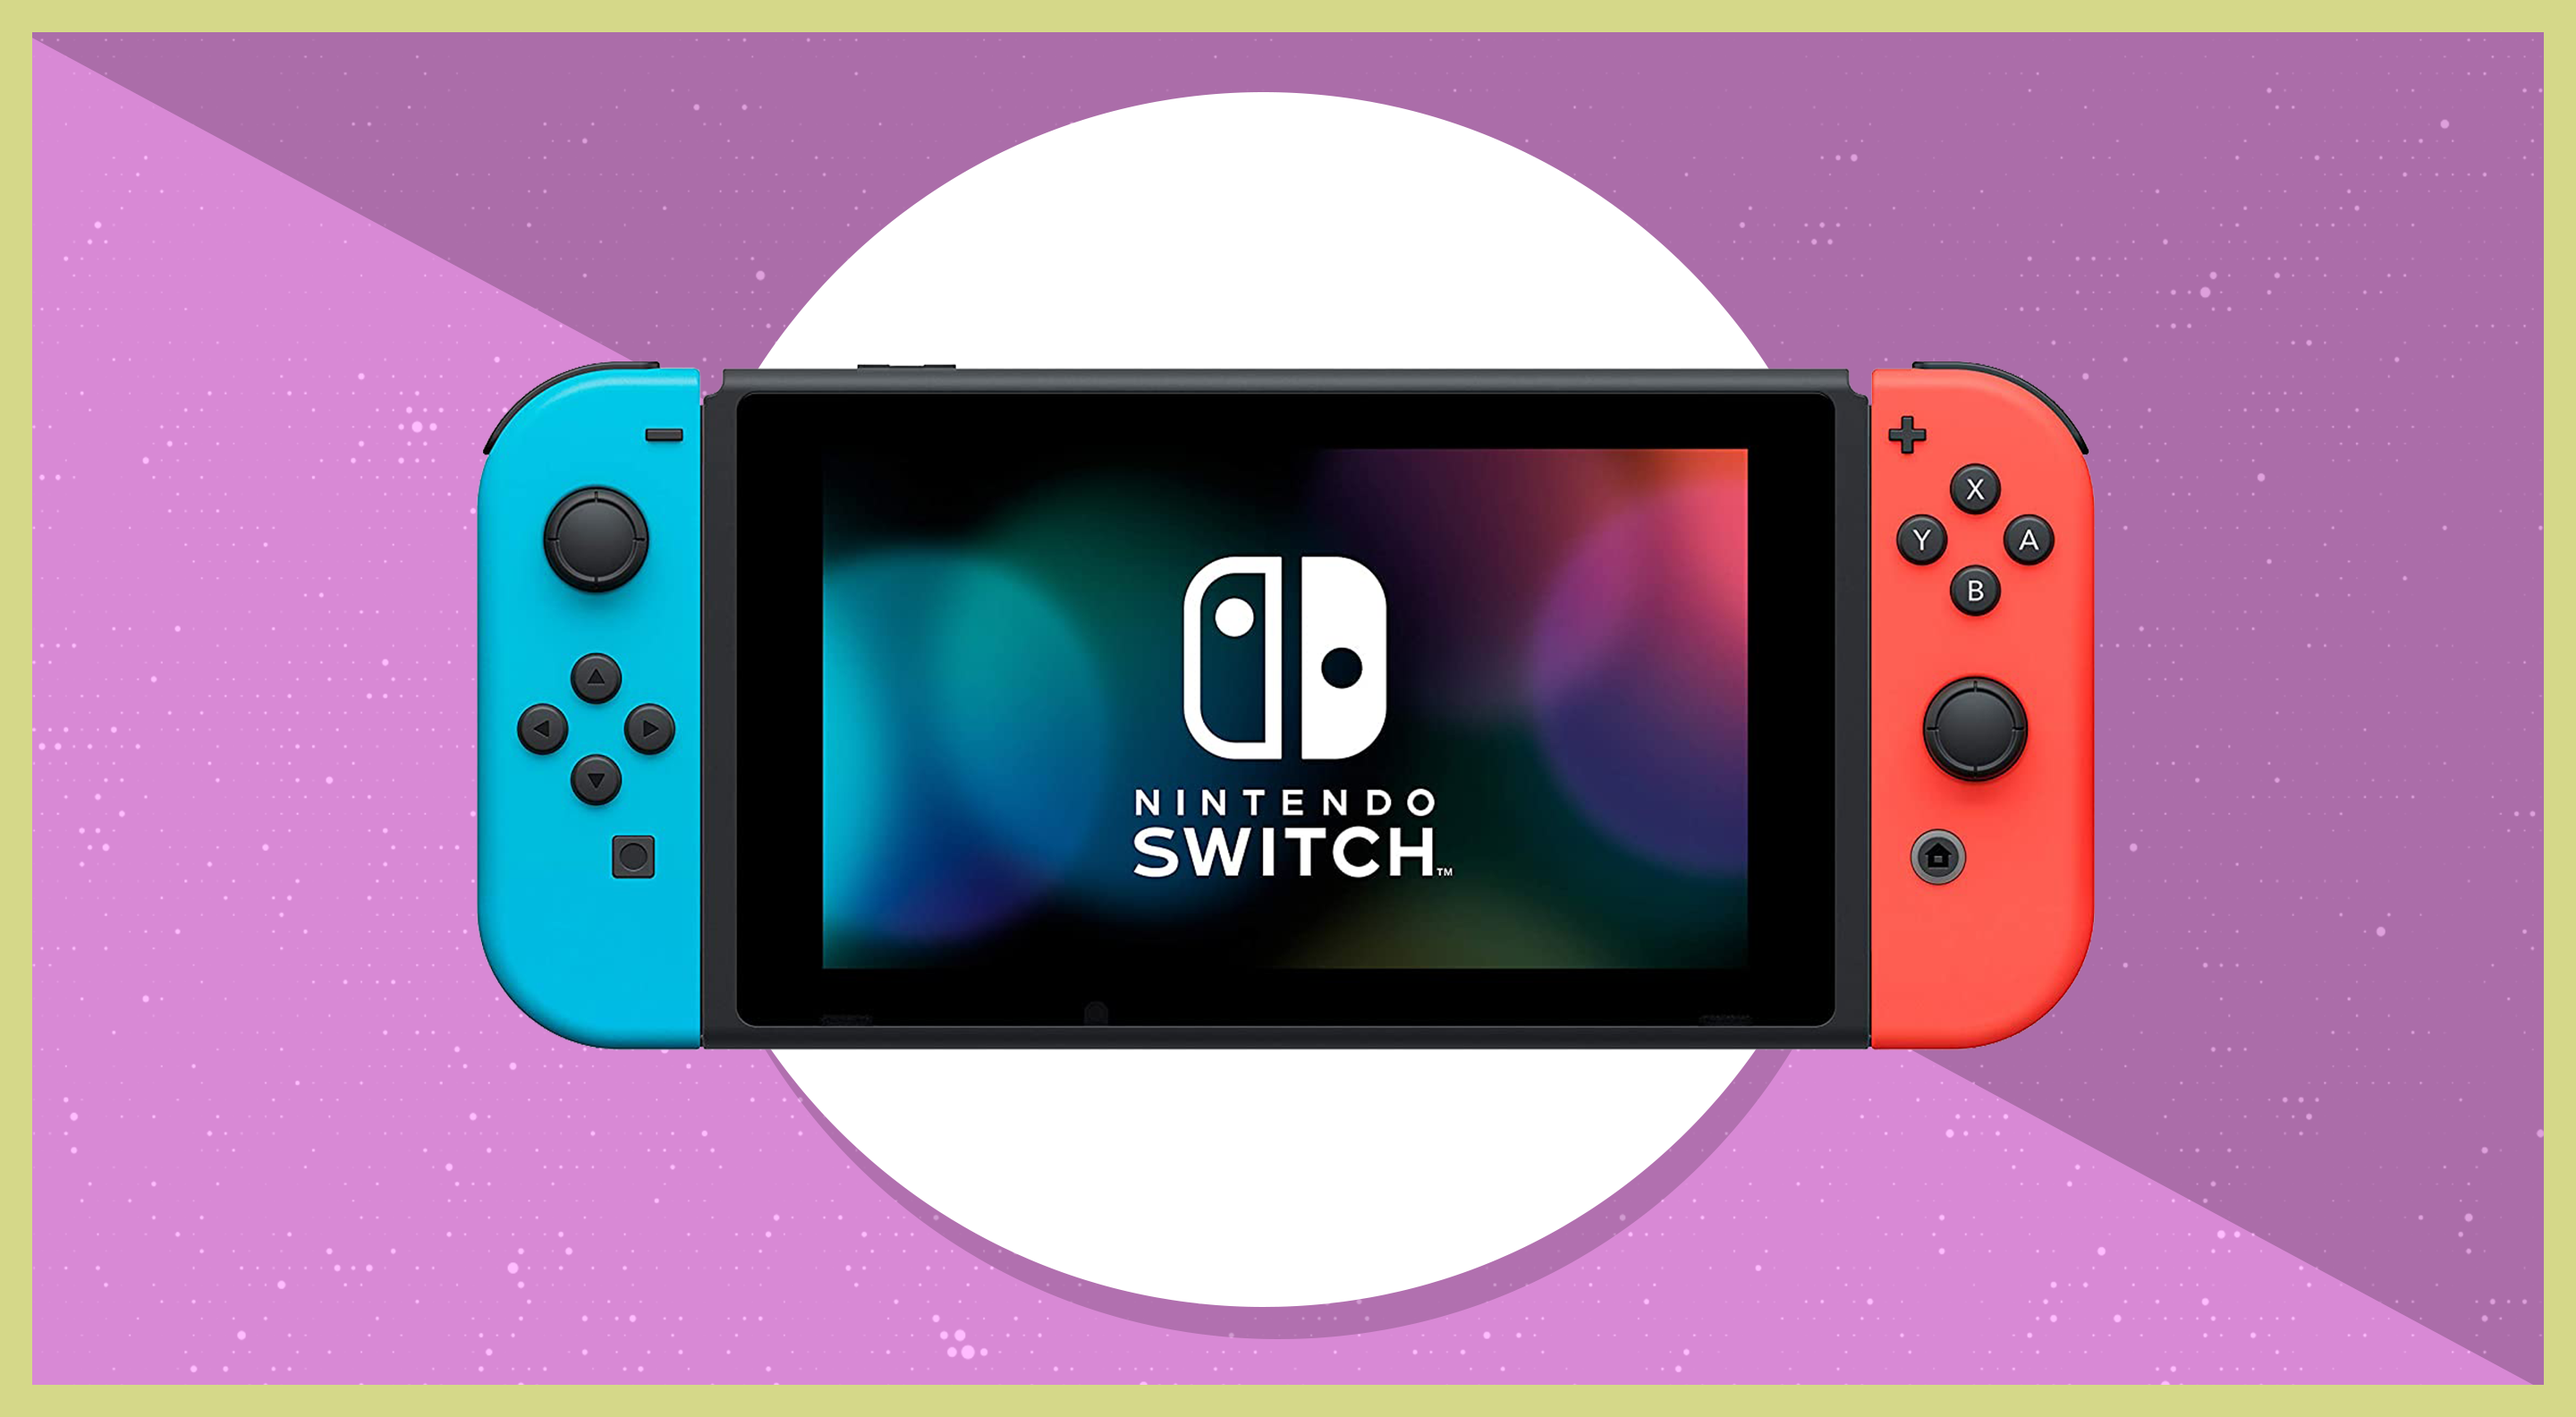 Good news! Amazon's No. 1 best-selling Nintendo Switch is back in stockâ€”get it before it sells out again - Yahoo Entertainment